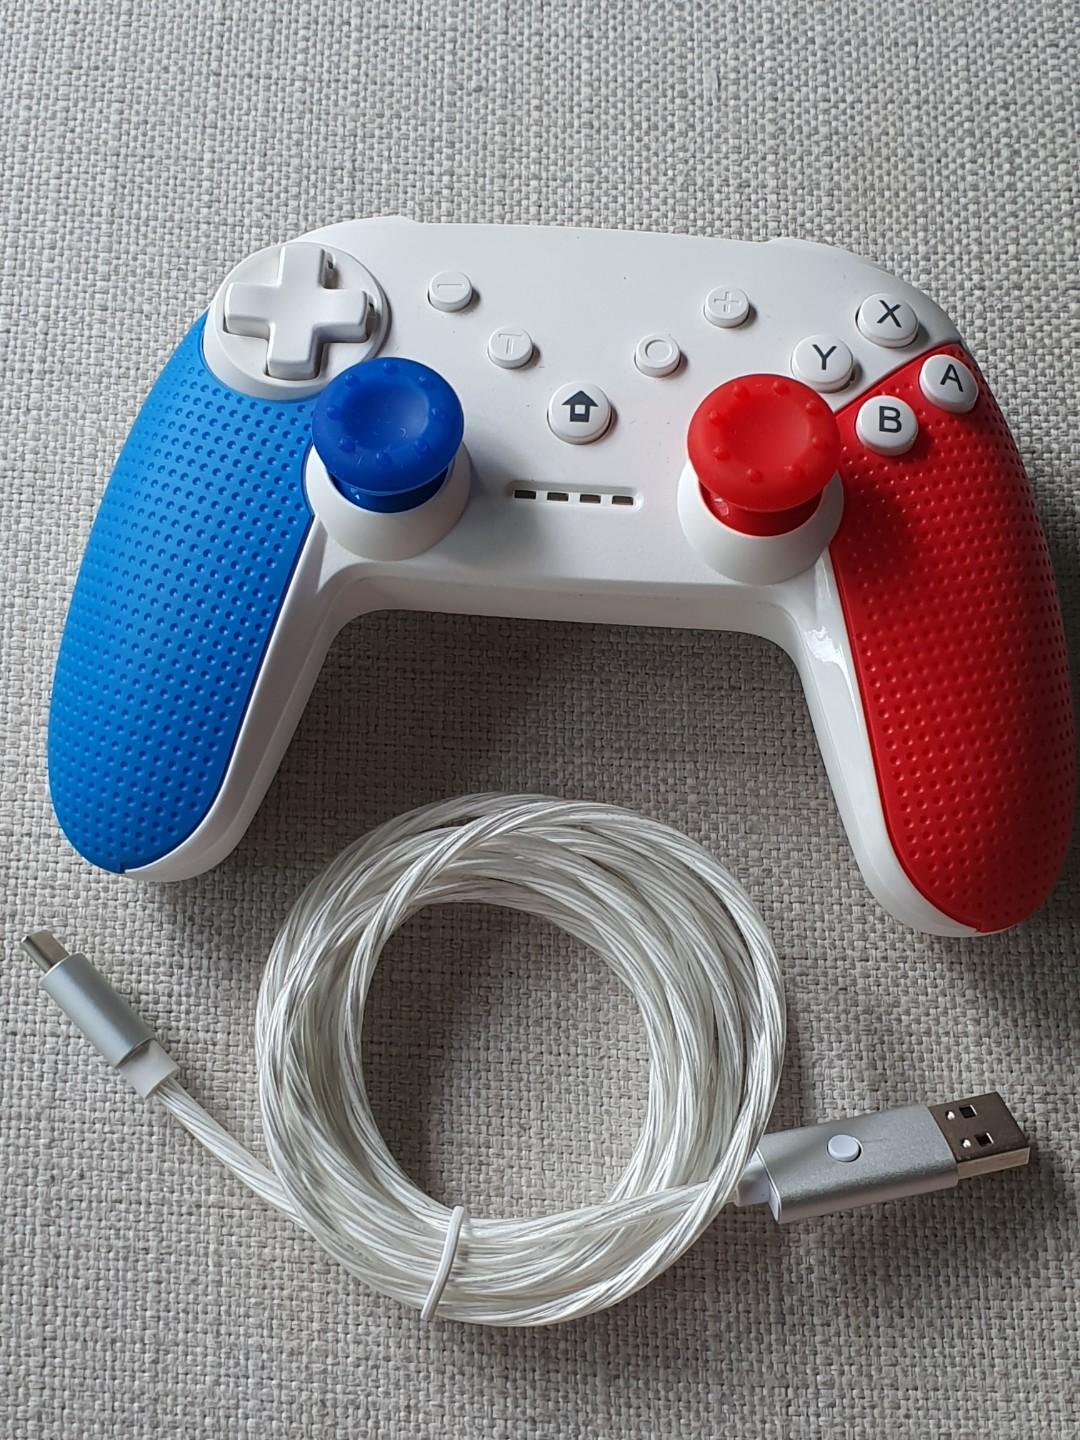 nintendo switch pro controller red and white